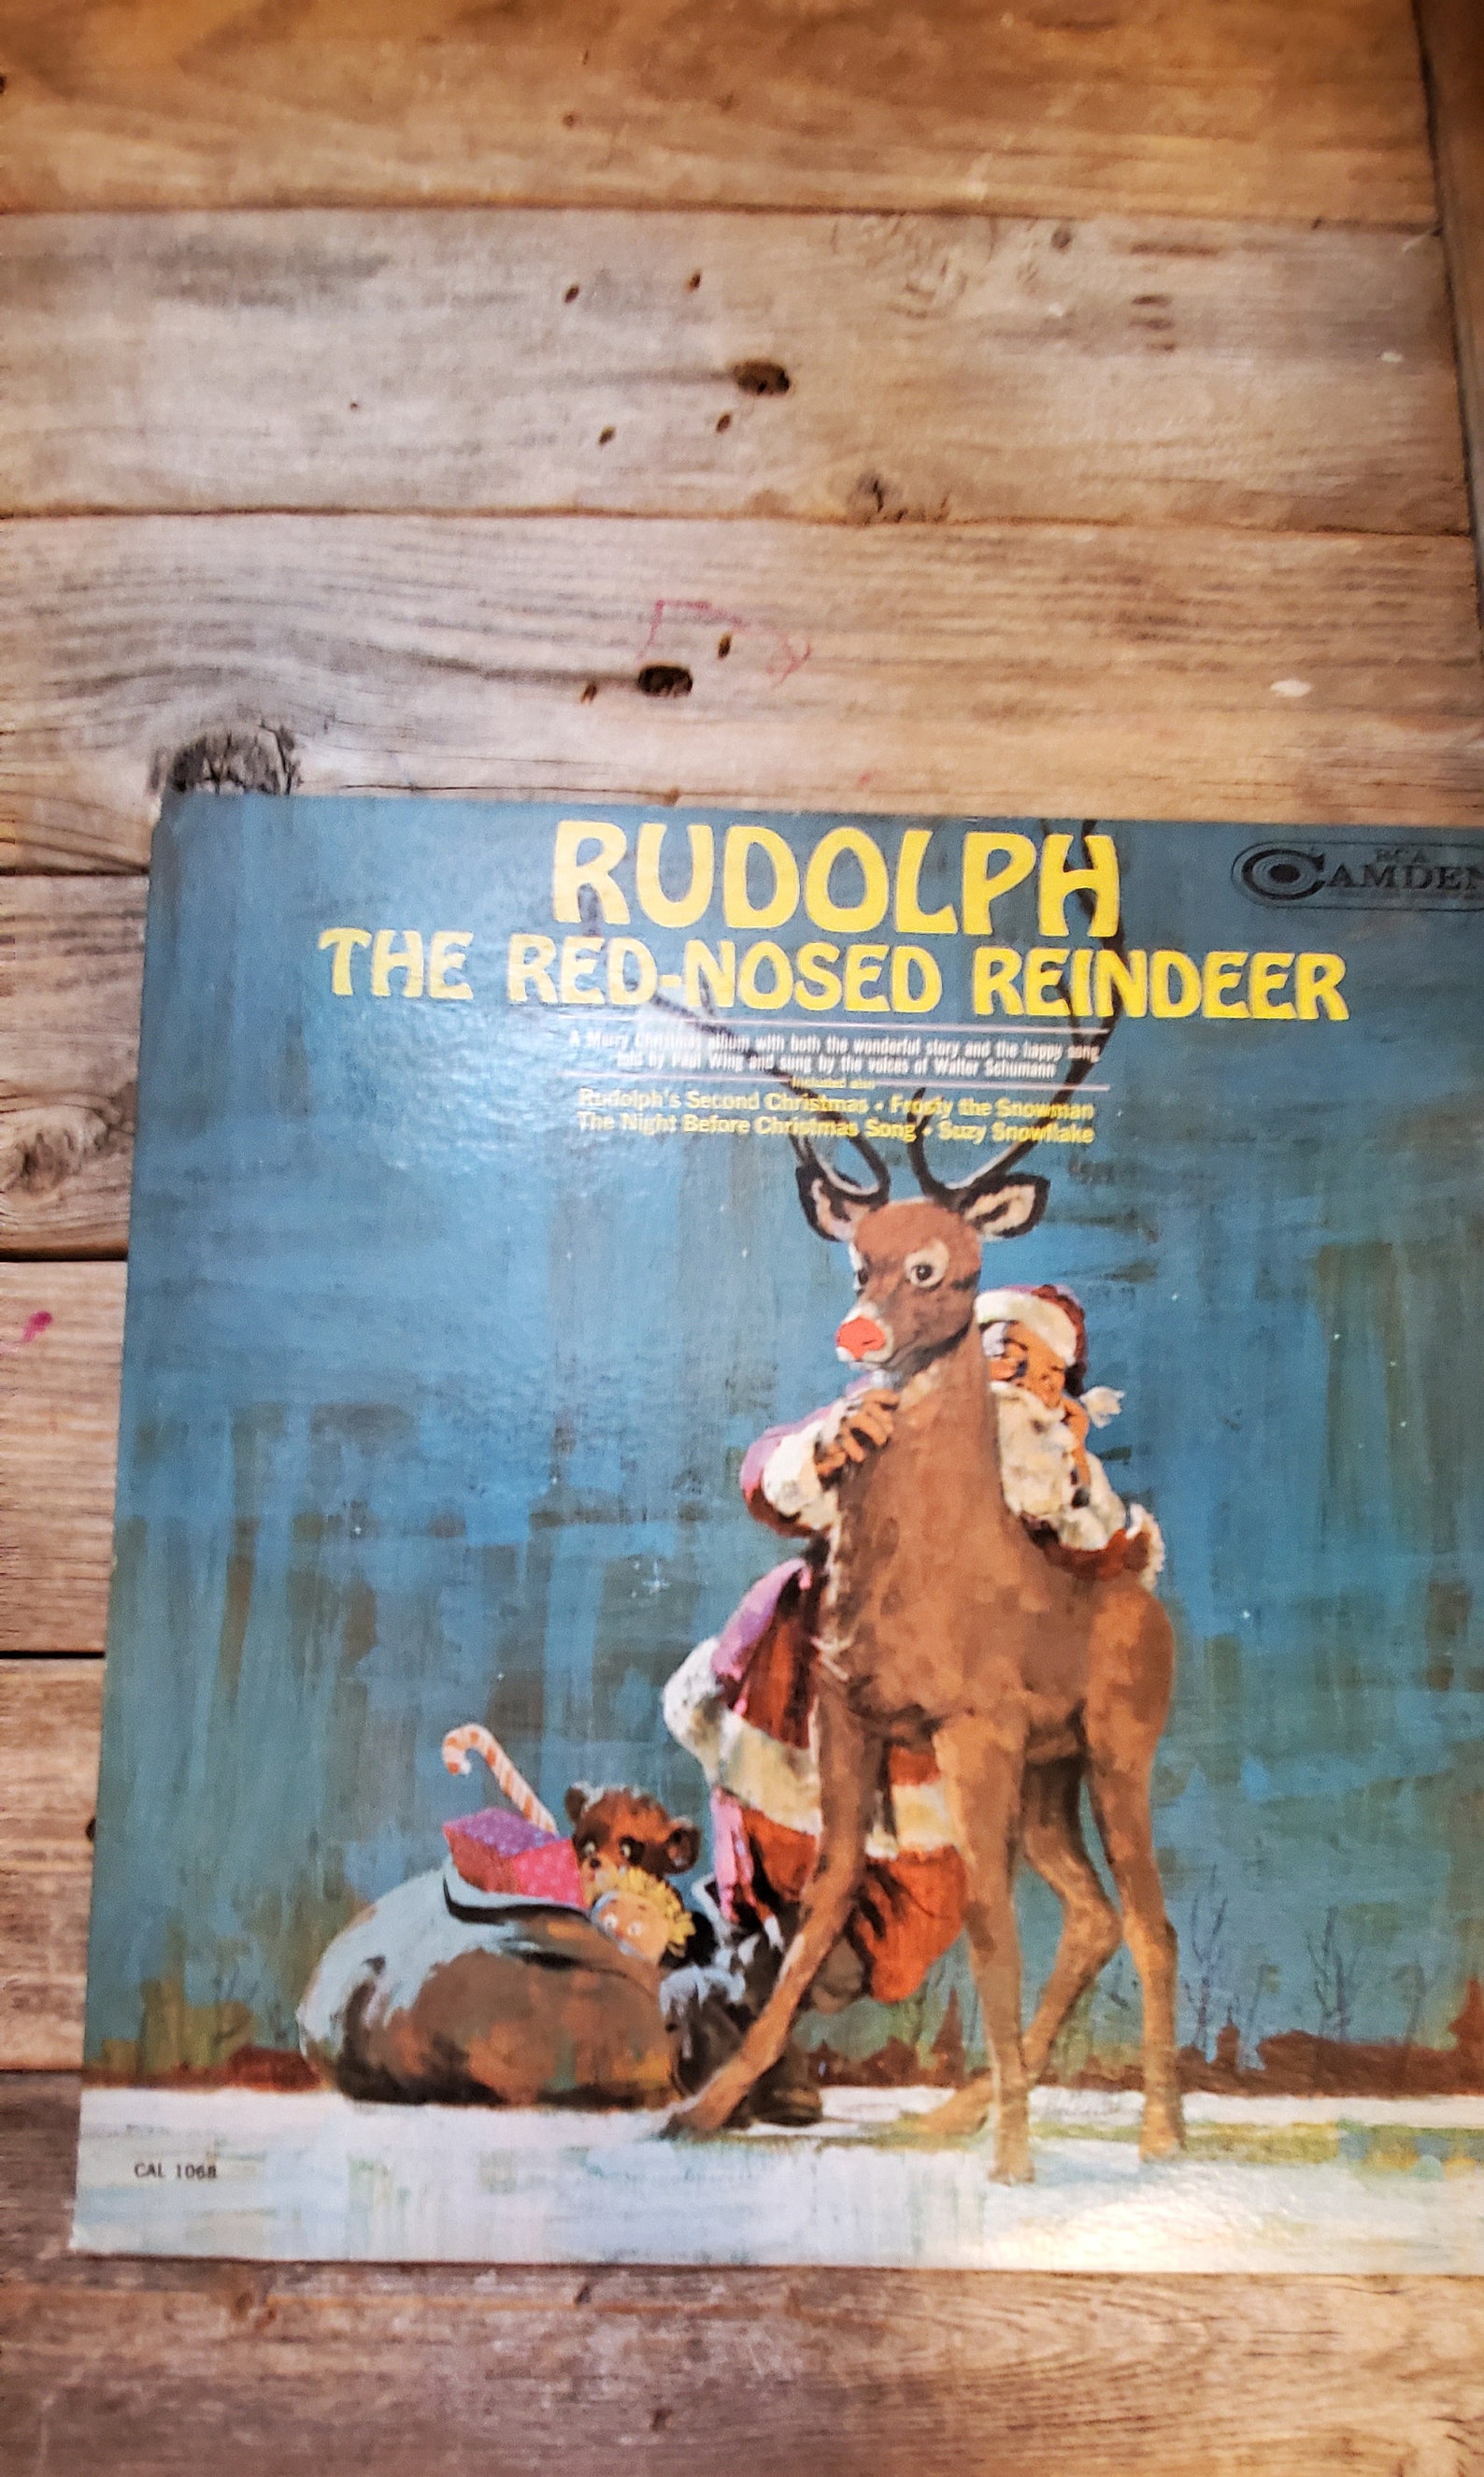 Rudolph The Red Nosed Reindeer Record | Etsy